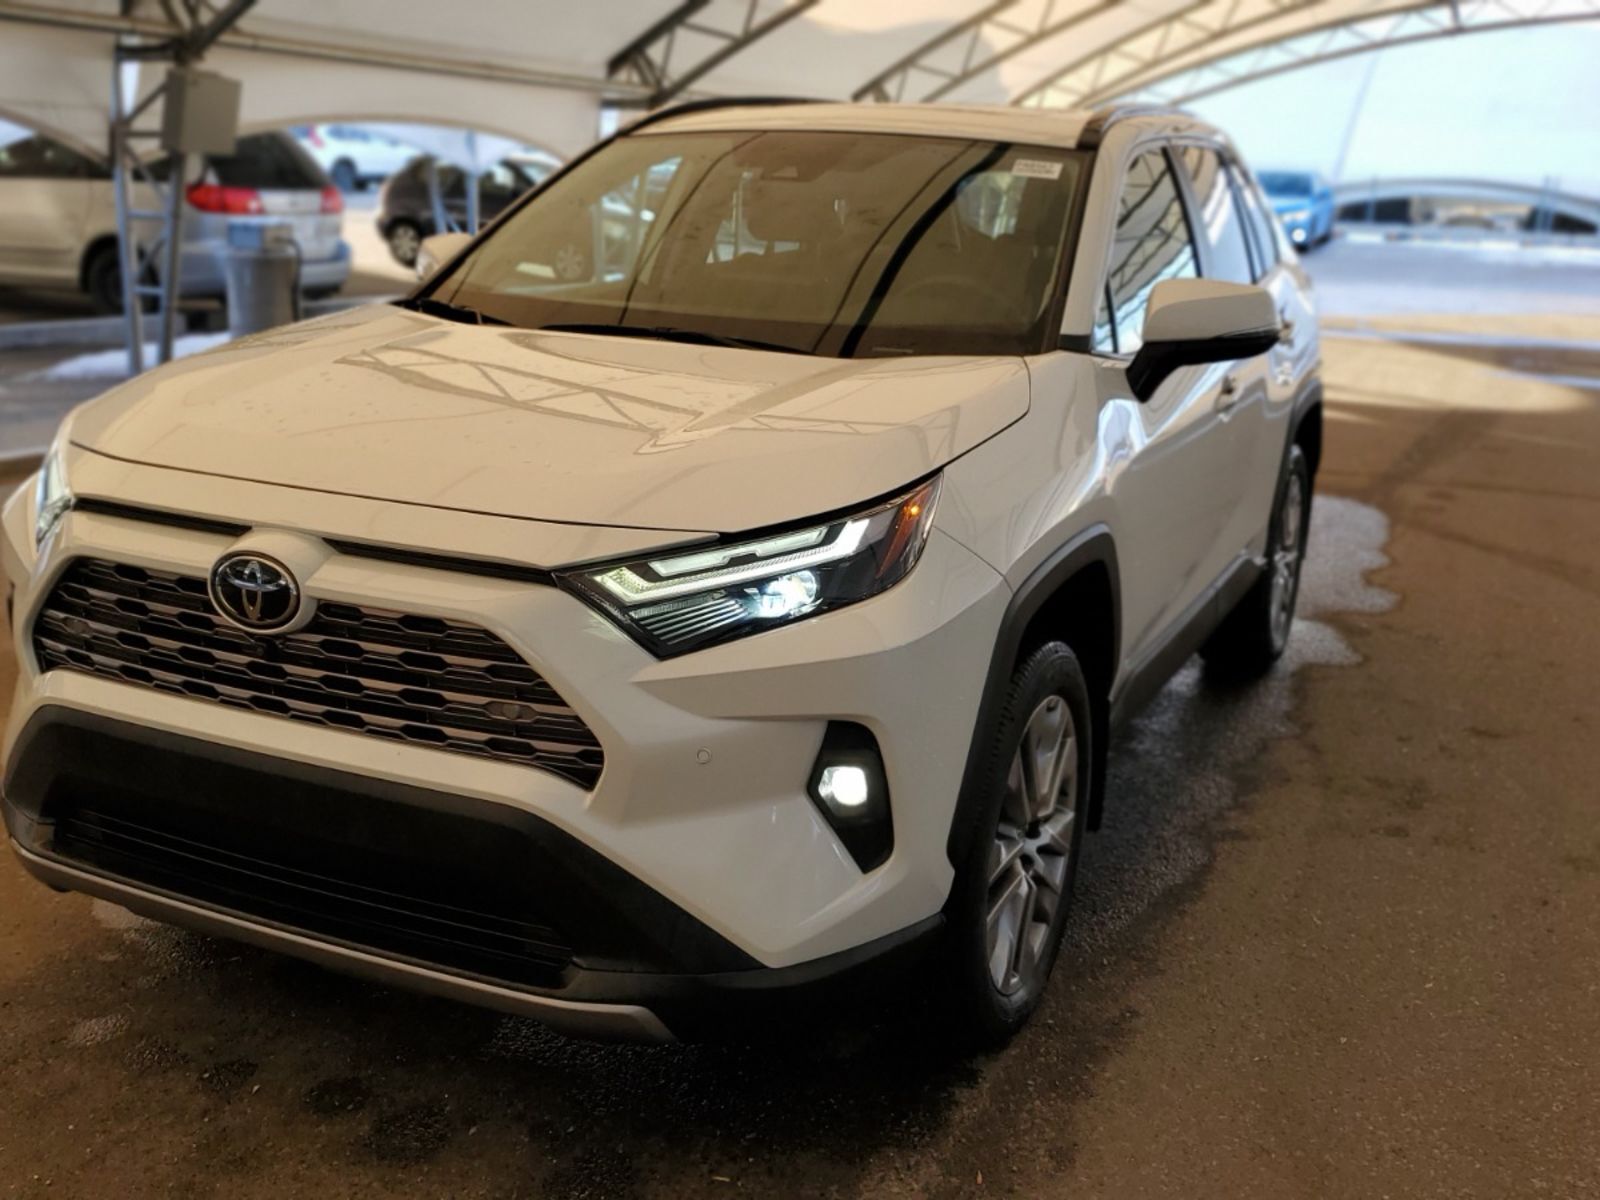 2022 Toyota RAV4 Limited - AWD, No Accidents, Leather, Navigation